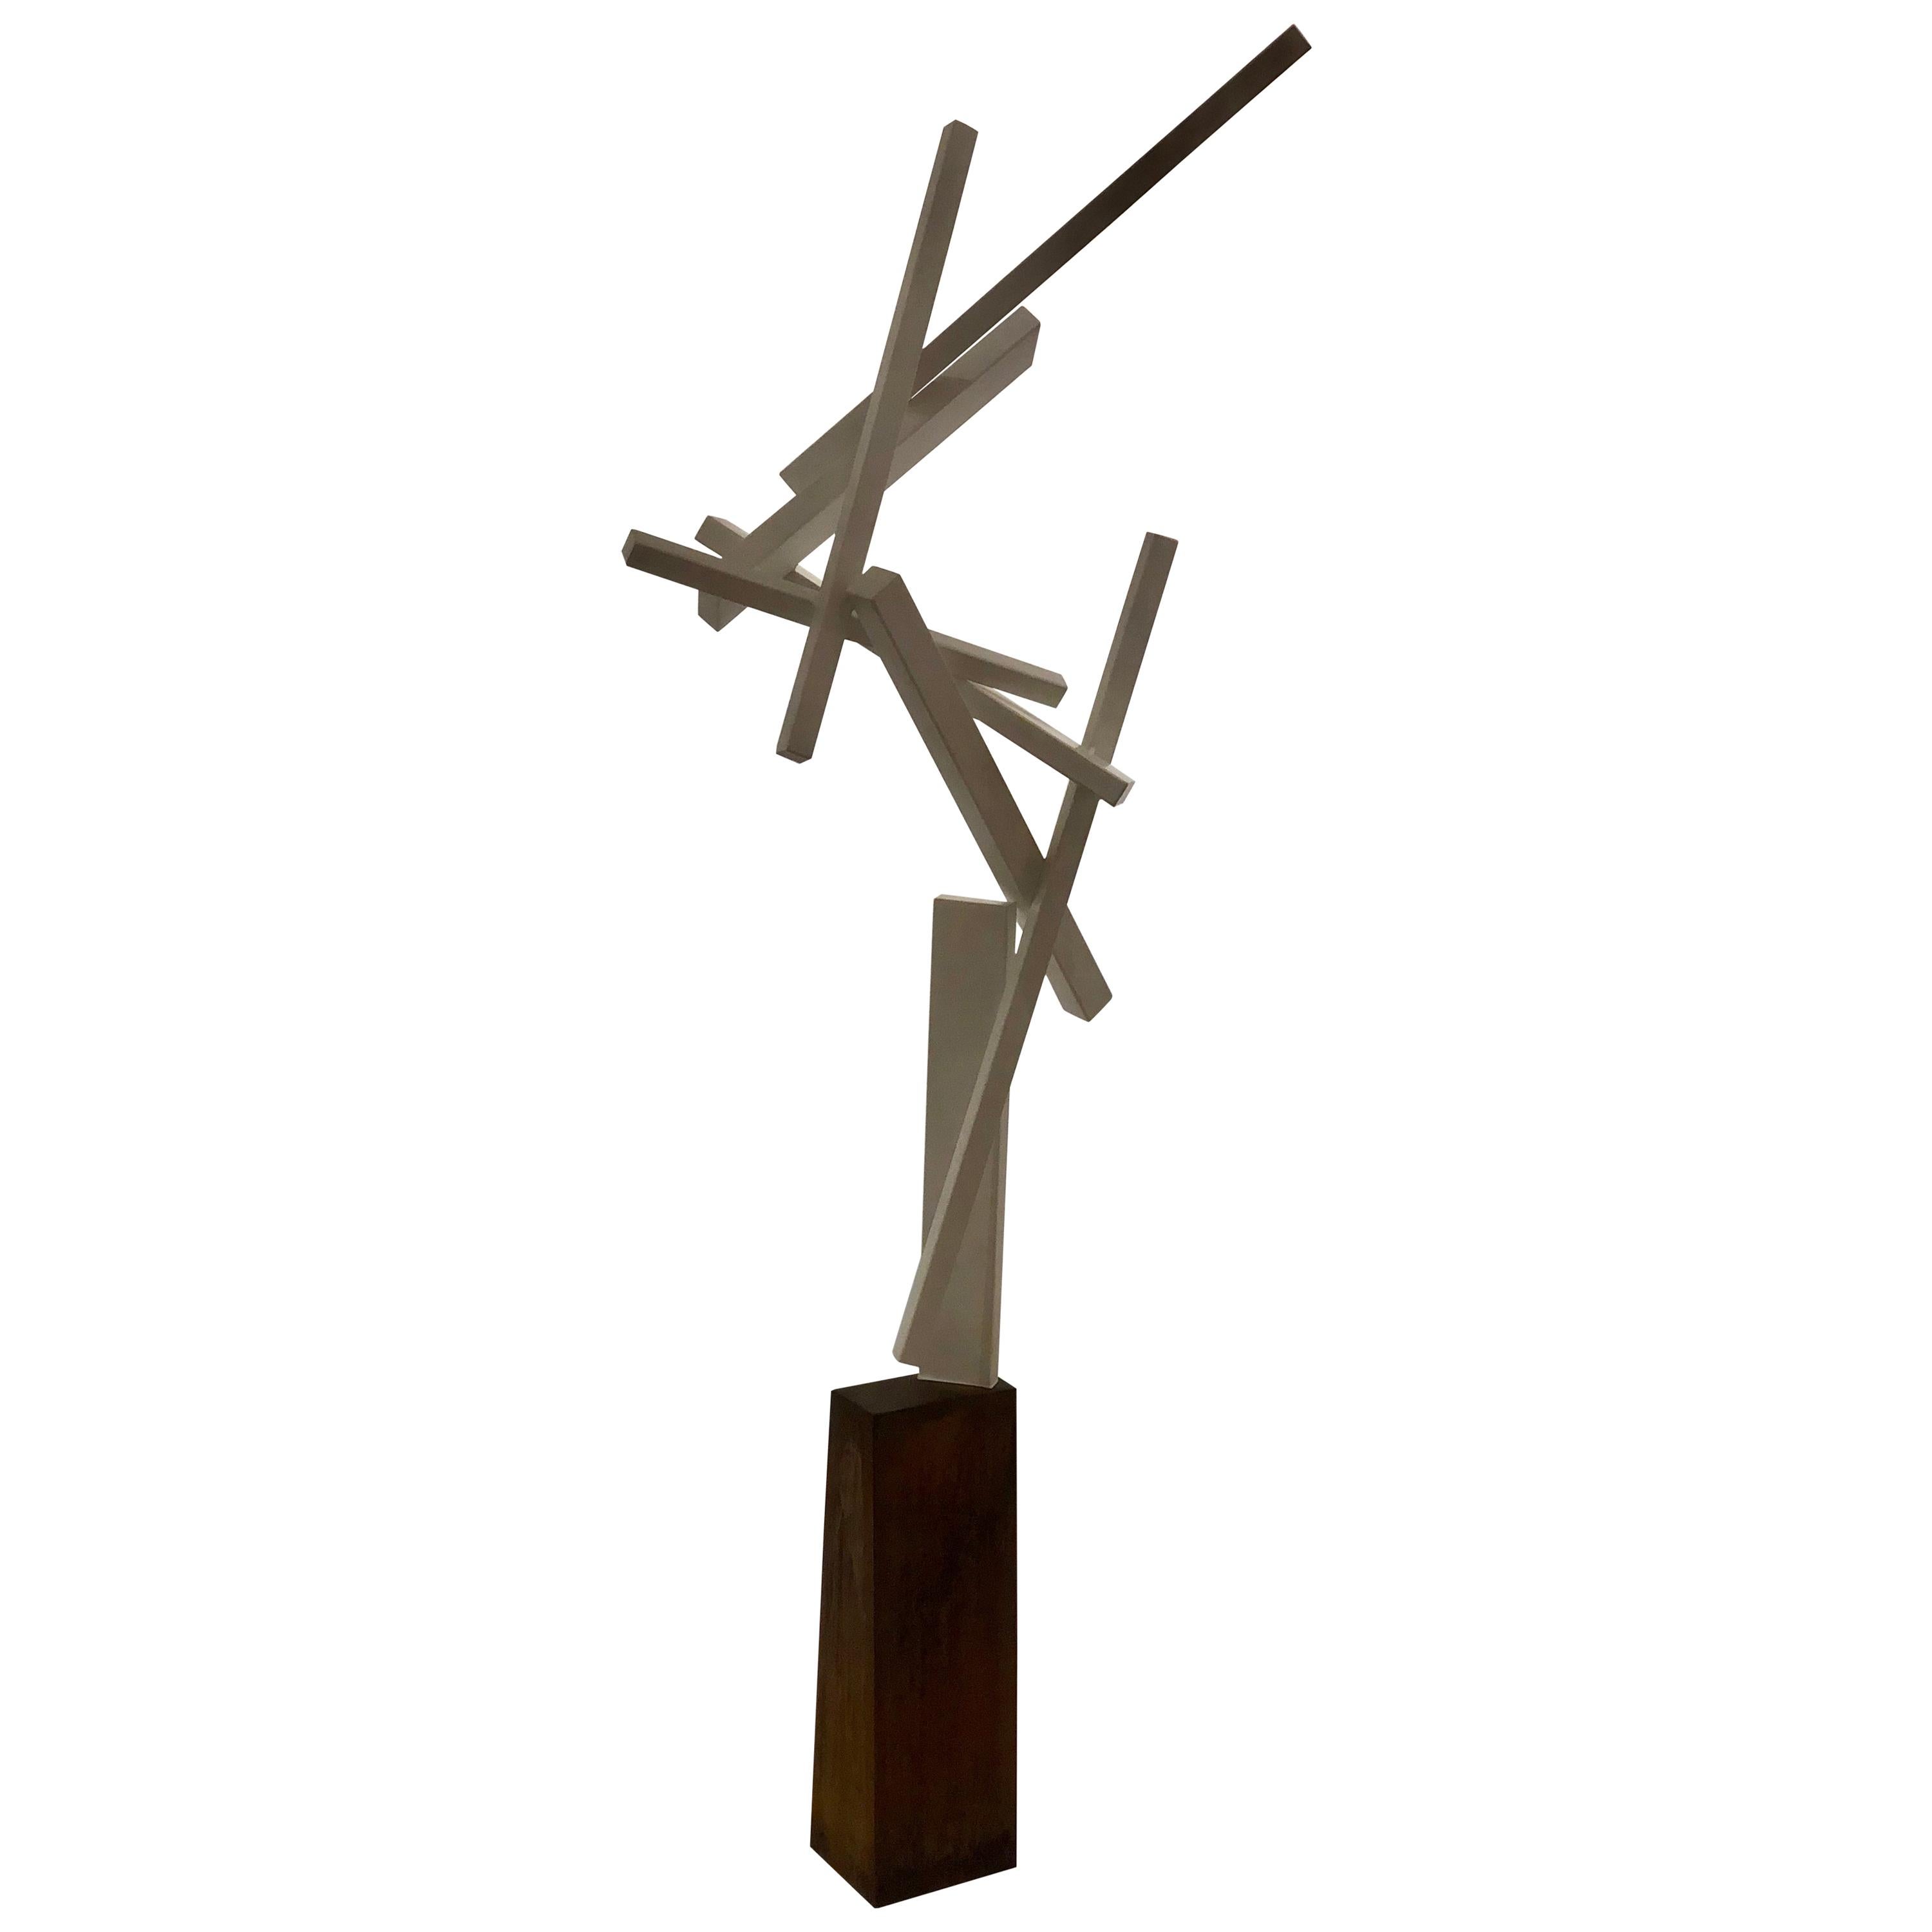 Striking Tall Contemporary Steel Sculpture by Joey Vaiasuso California Design